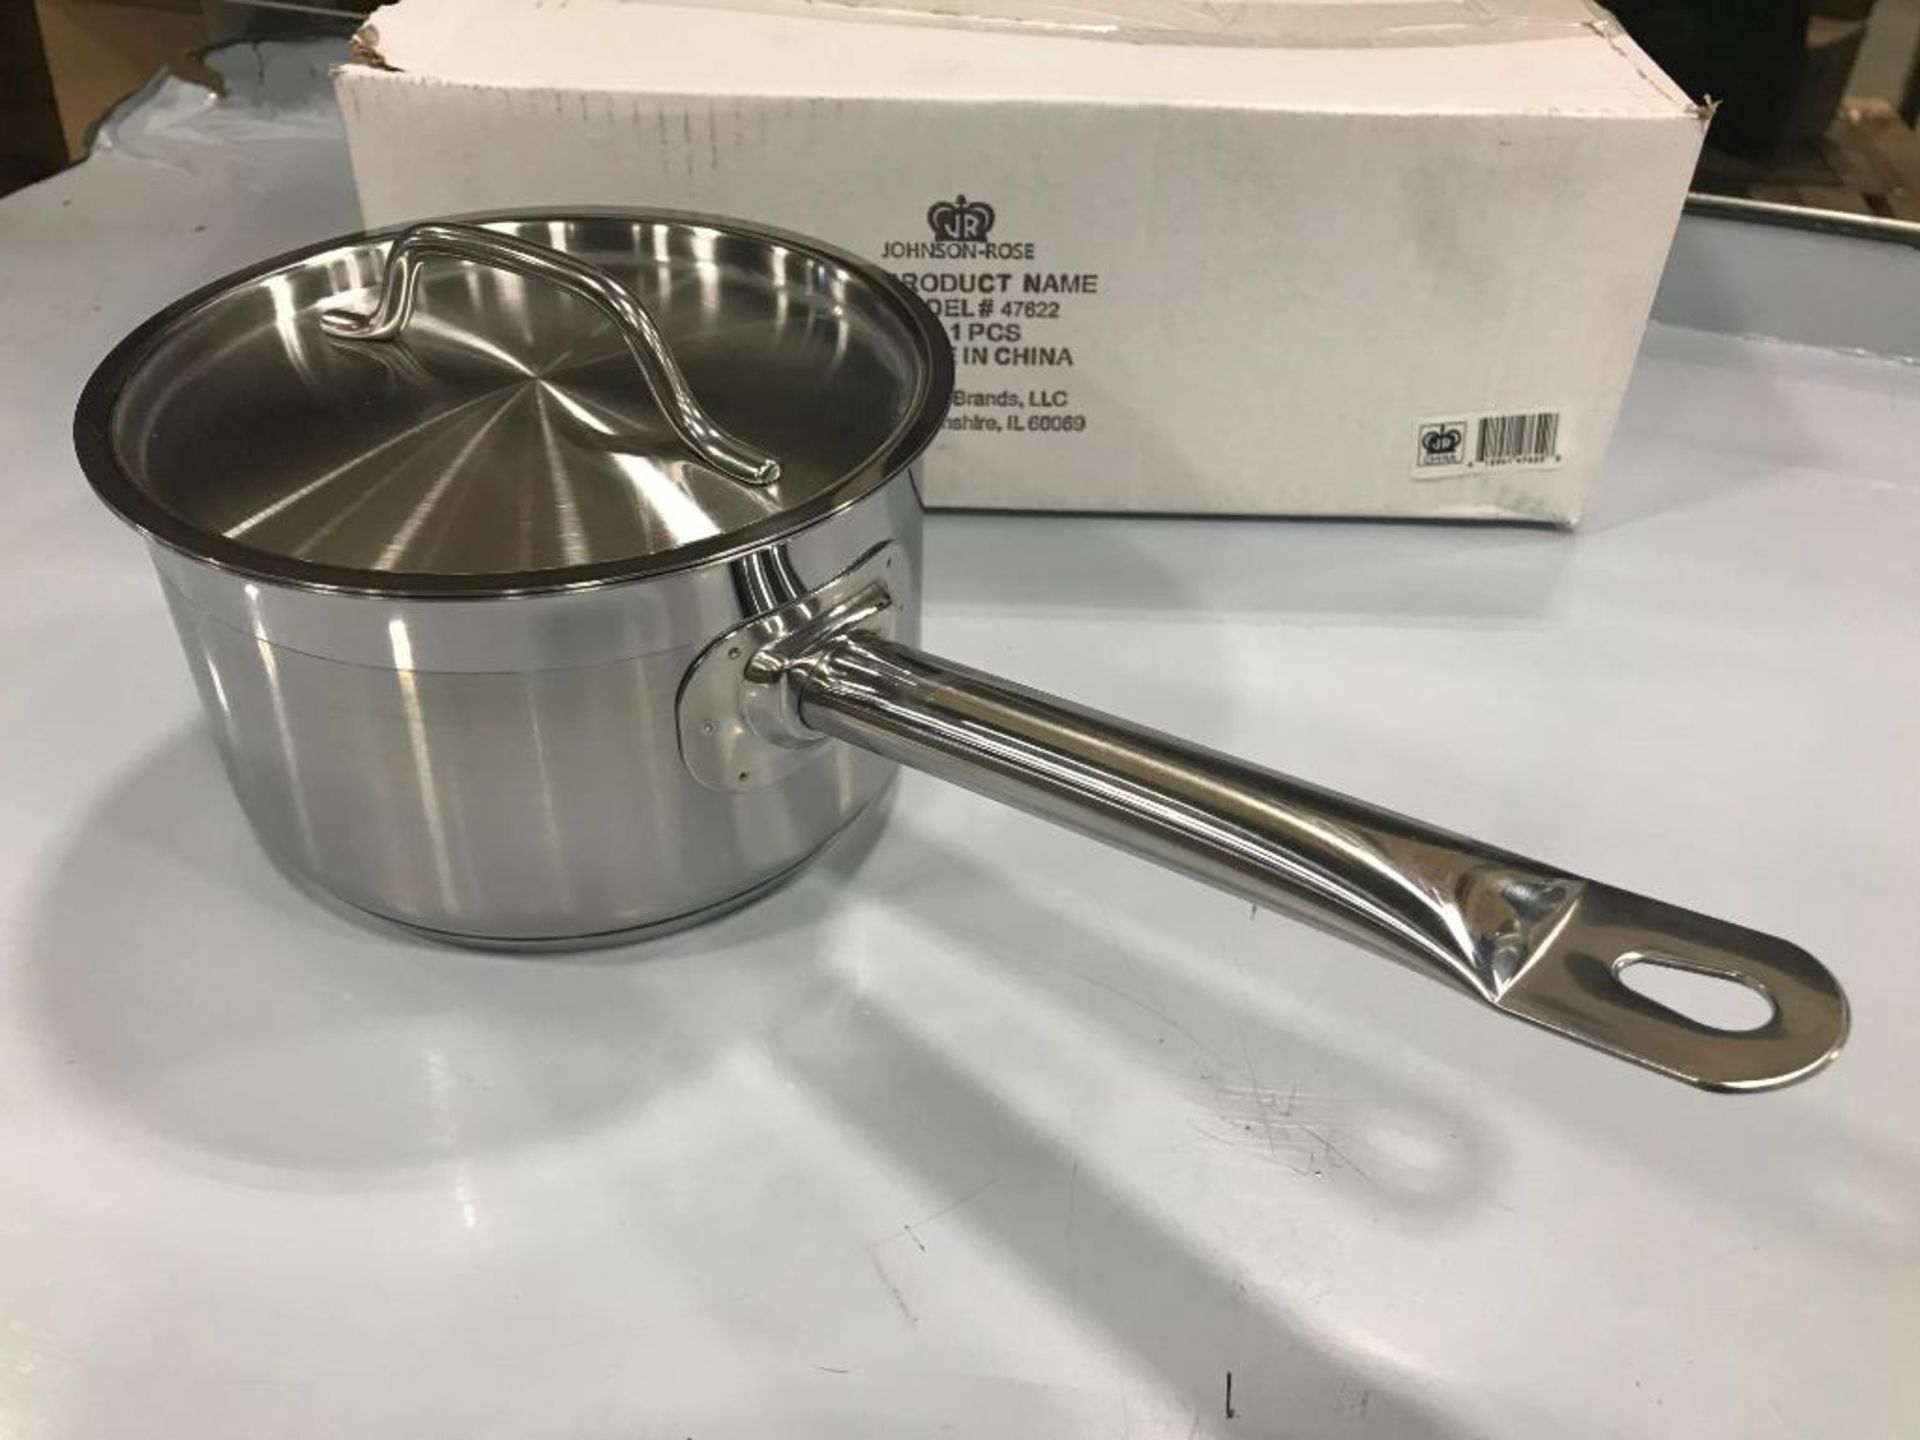 2QT HEAVY DUTY STAINLESS SAUCE PAN INDUCTION CAPABLE, JR 47622 - NEW - Image 3 of 3